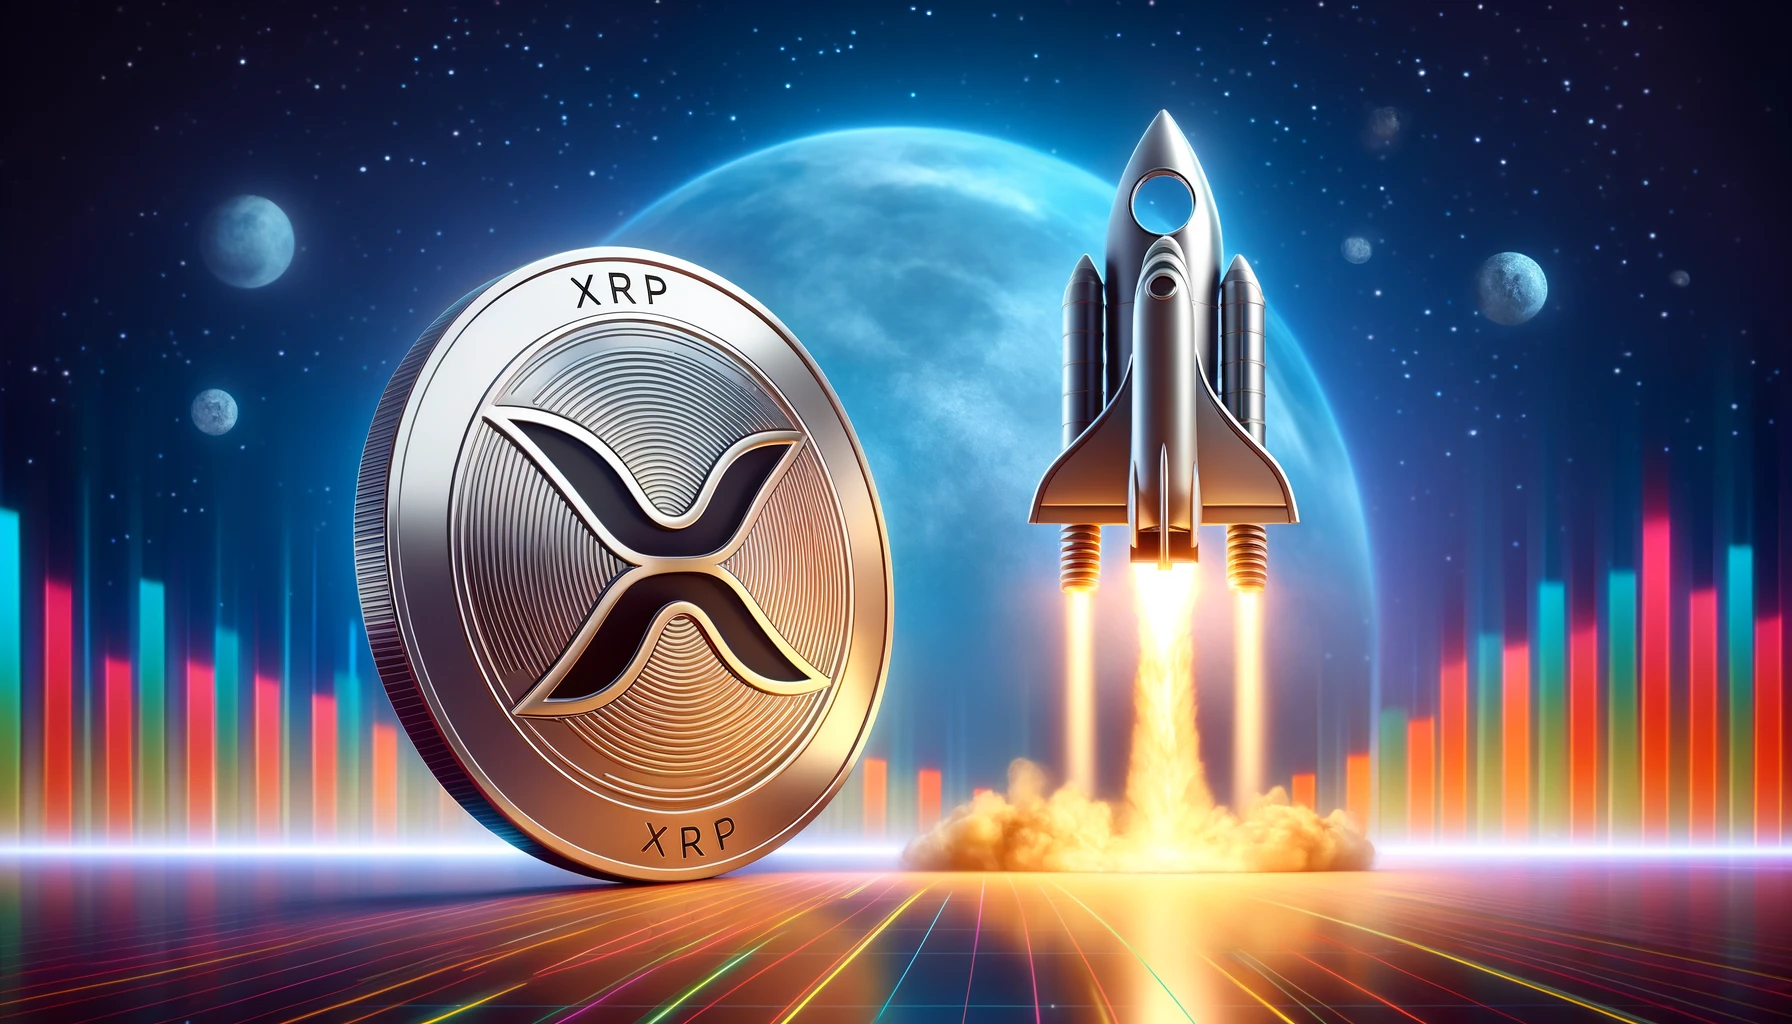 Crypto Analyst Predicts XRP Price Explosion To Over 